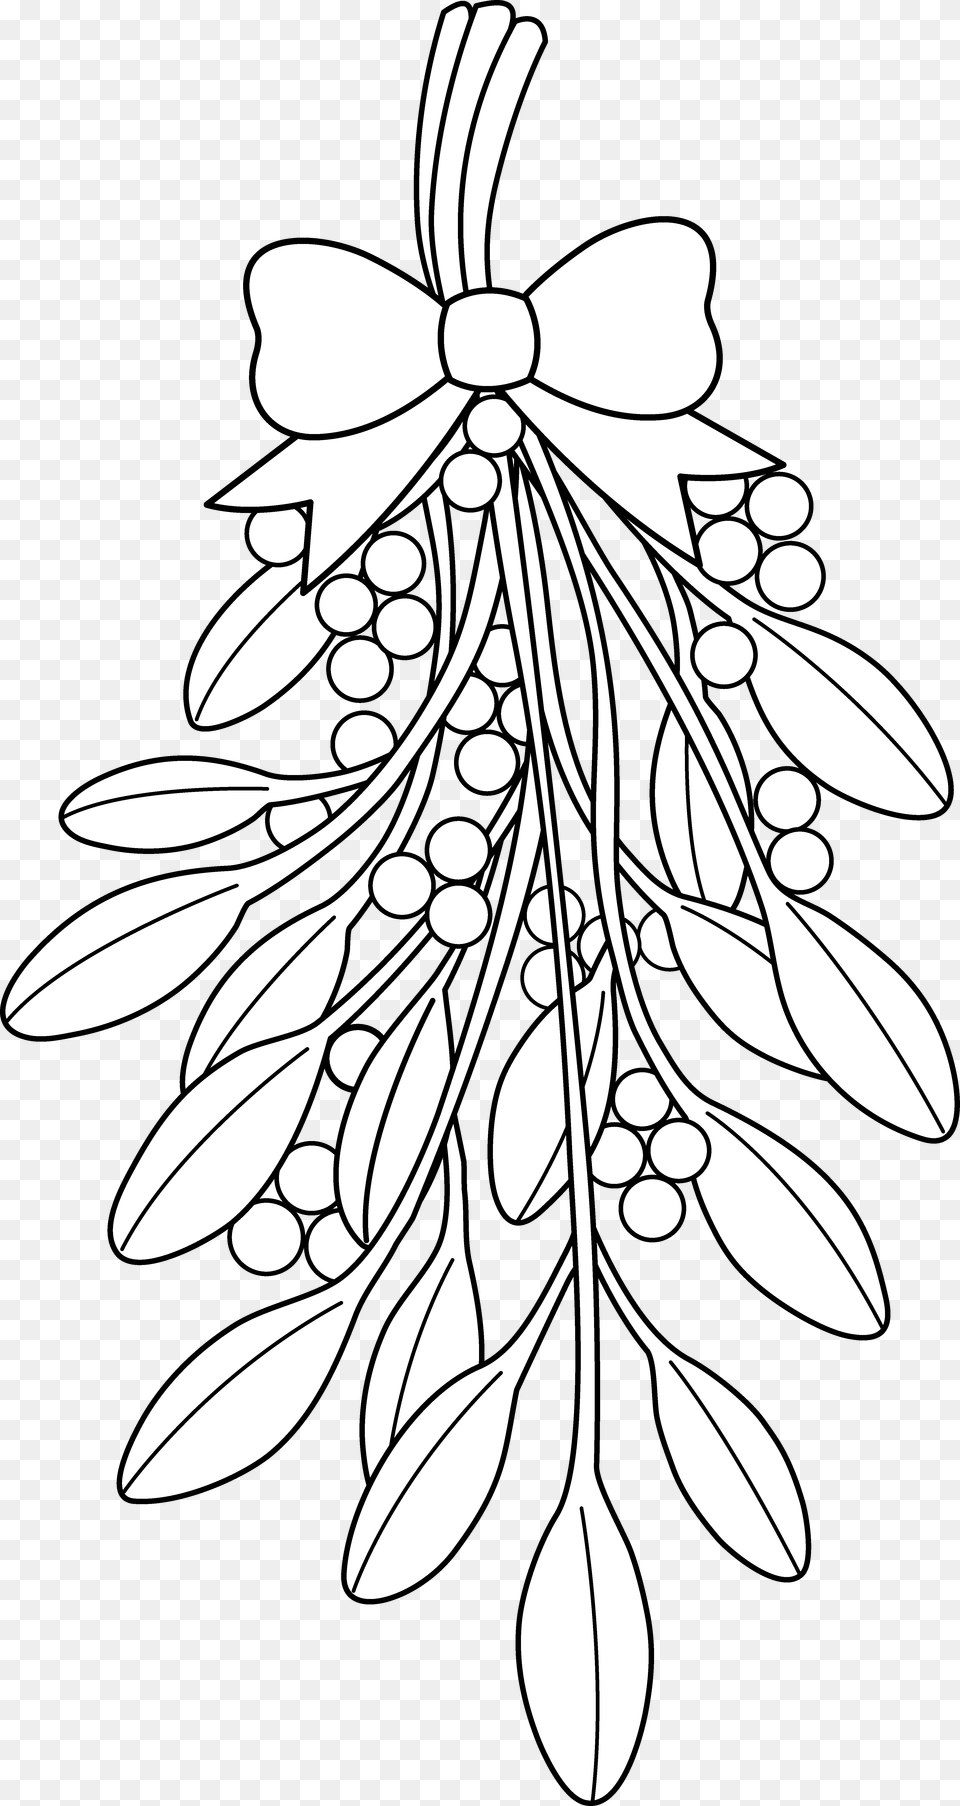 Poinsettia Flower Christmas Mistletoe Coloring Pages, Art, Drawing, Floral Design, Graphics Png Image